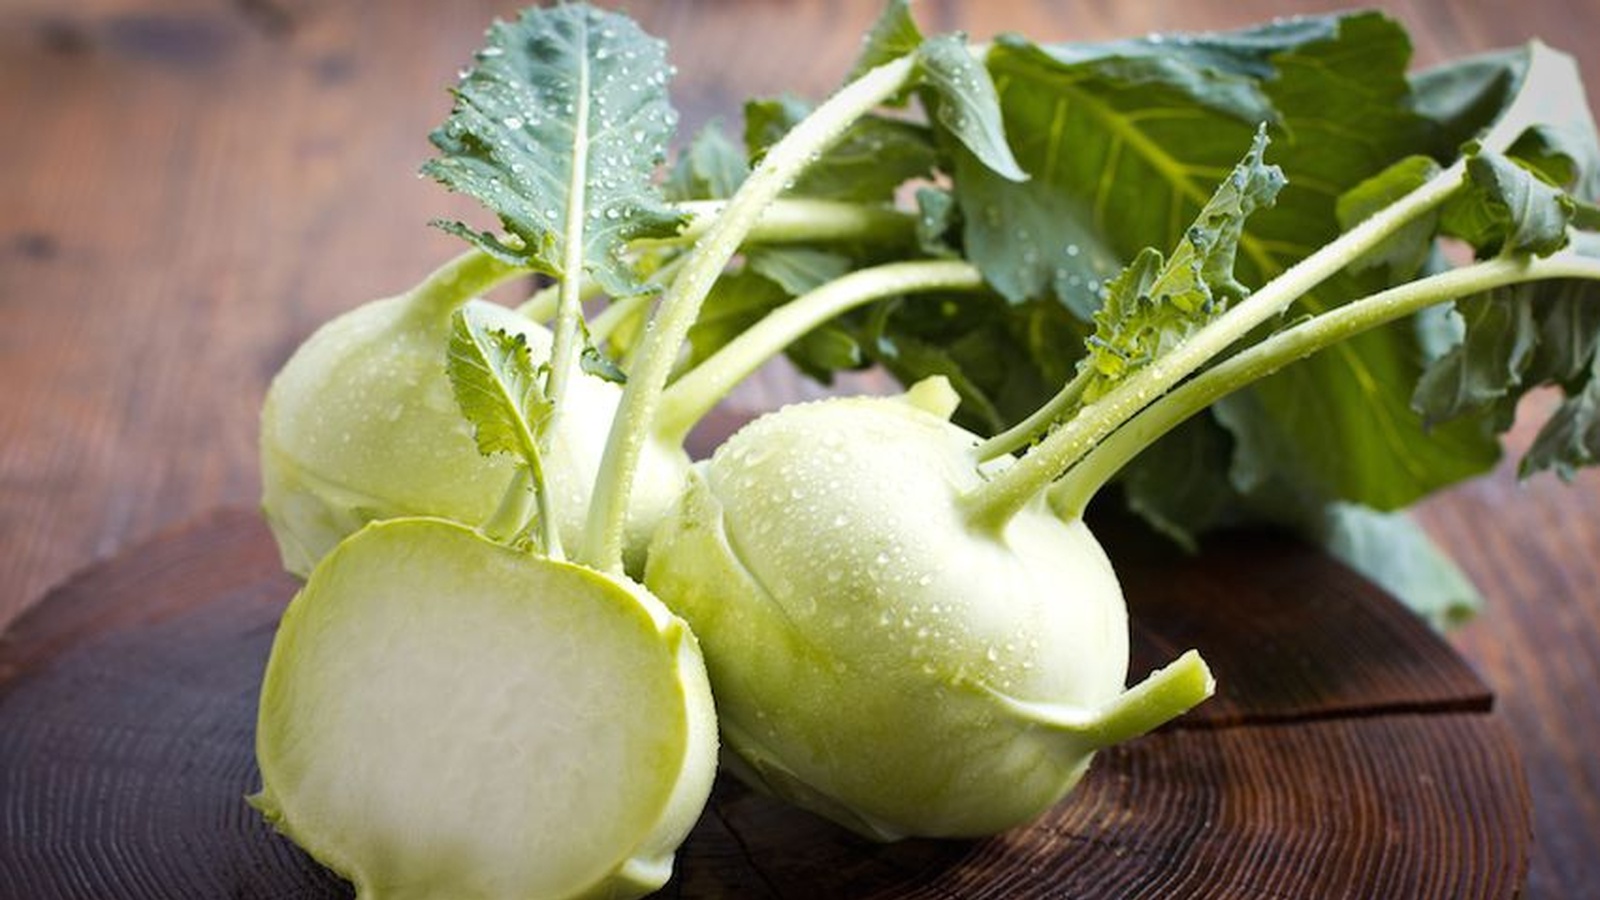 5 Exciting Reasons to Discover Kohlrabi